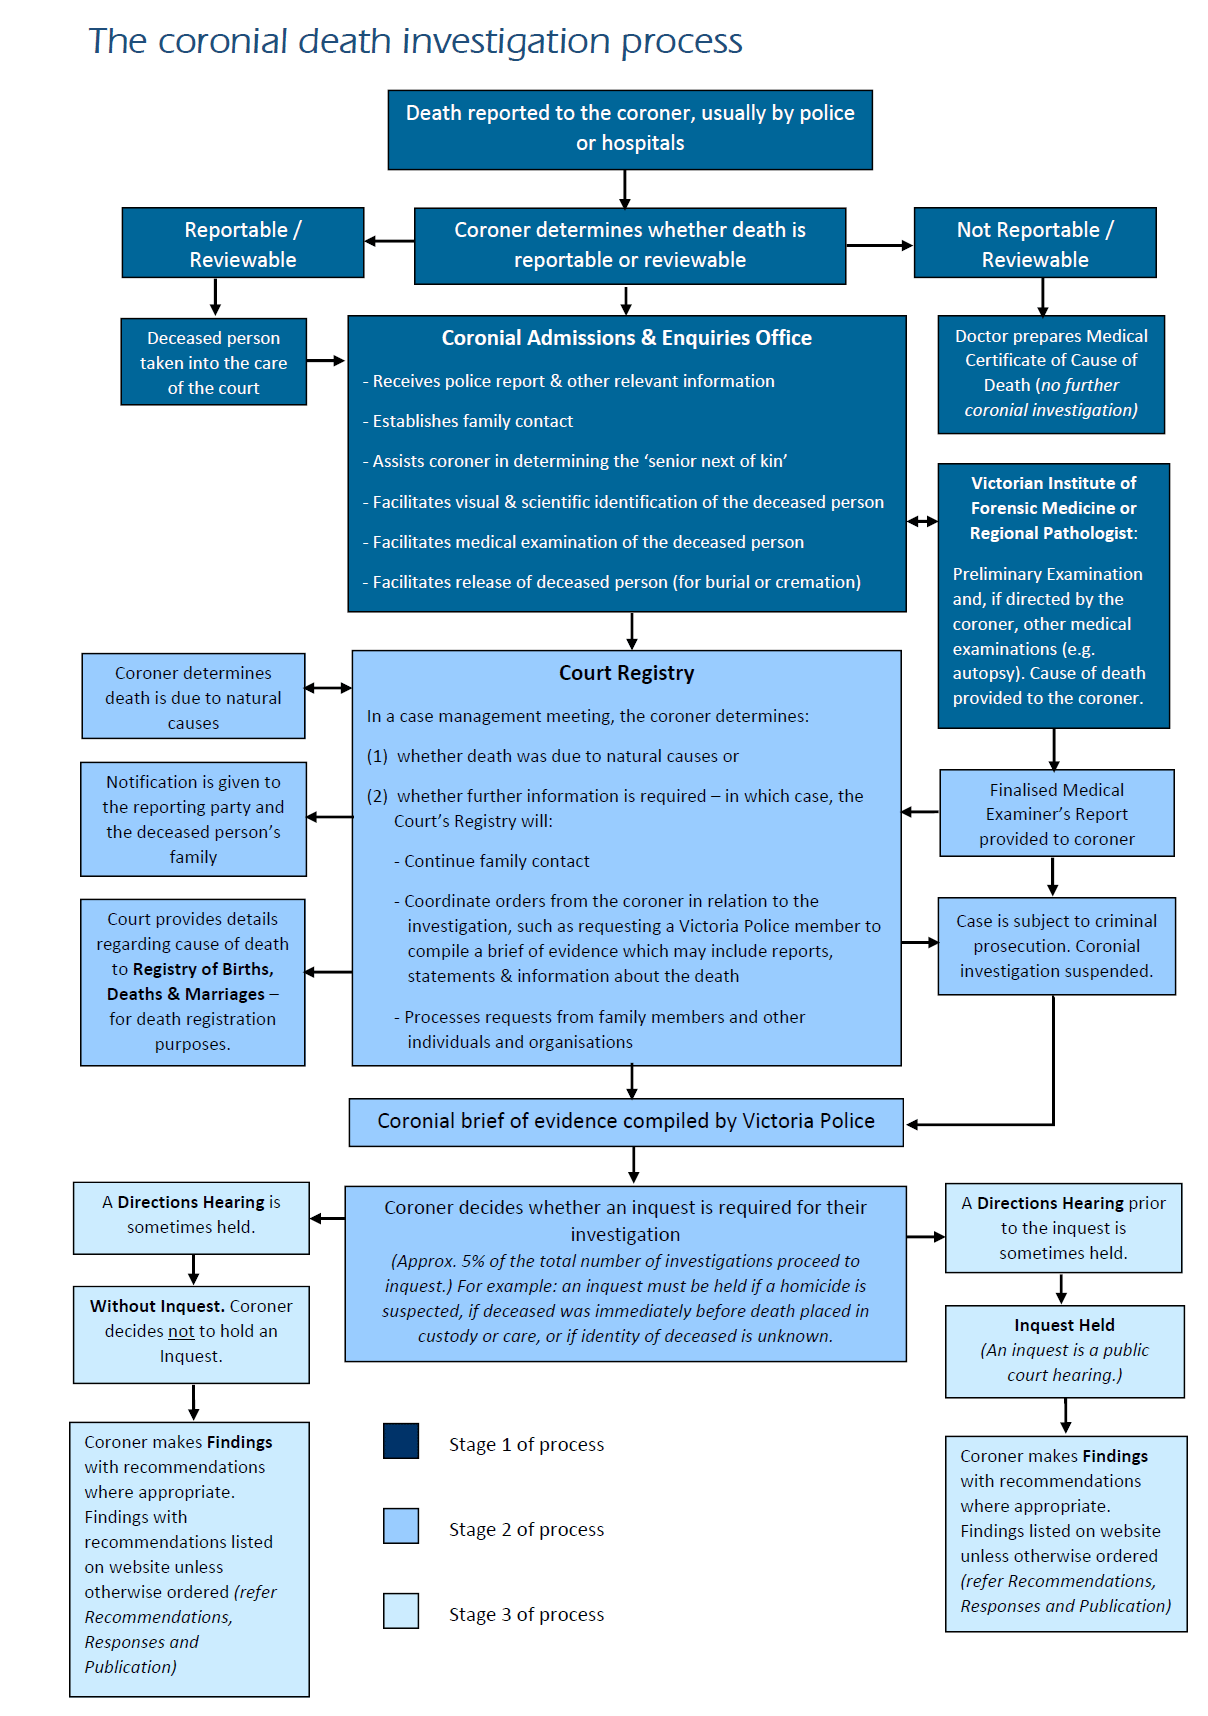 A flow chart of the processes and stages of a coroner's investigation into a death.